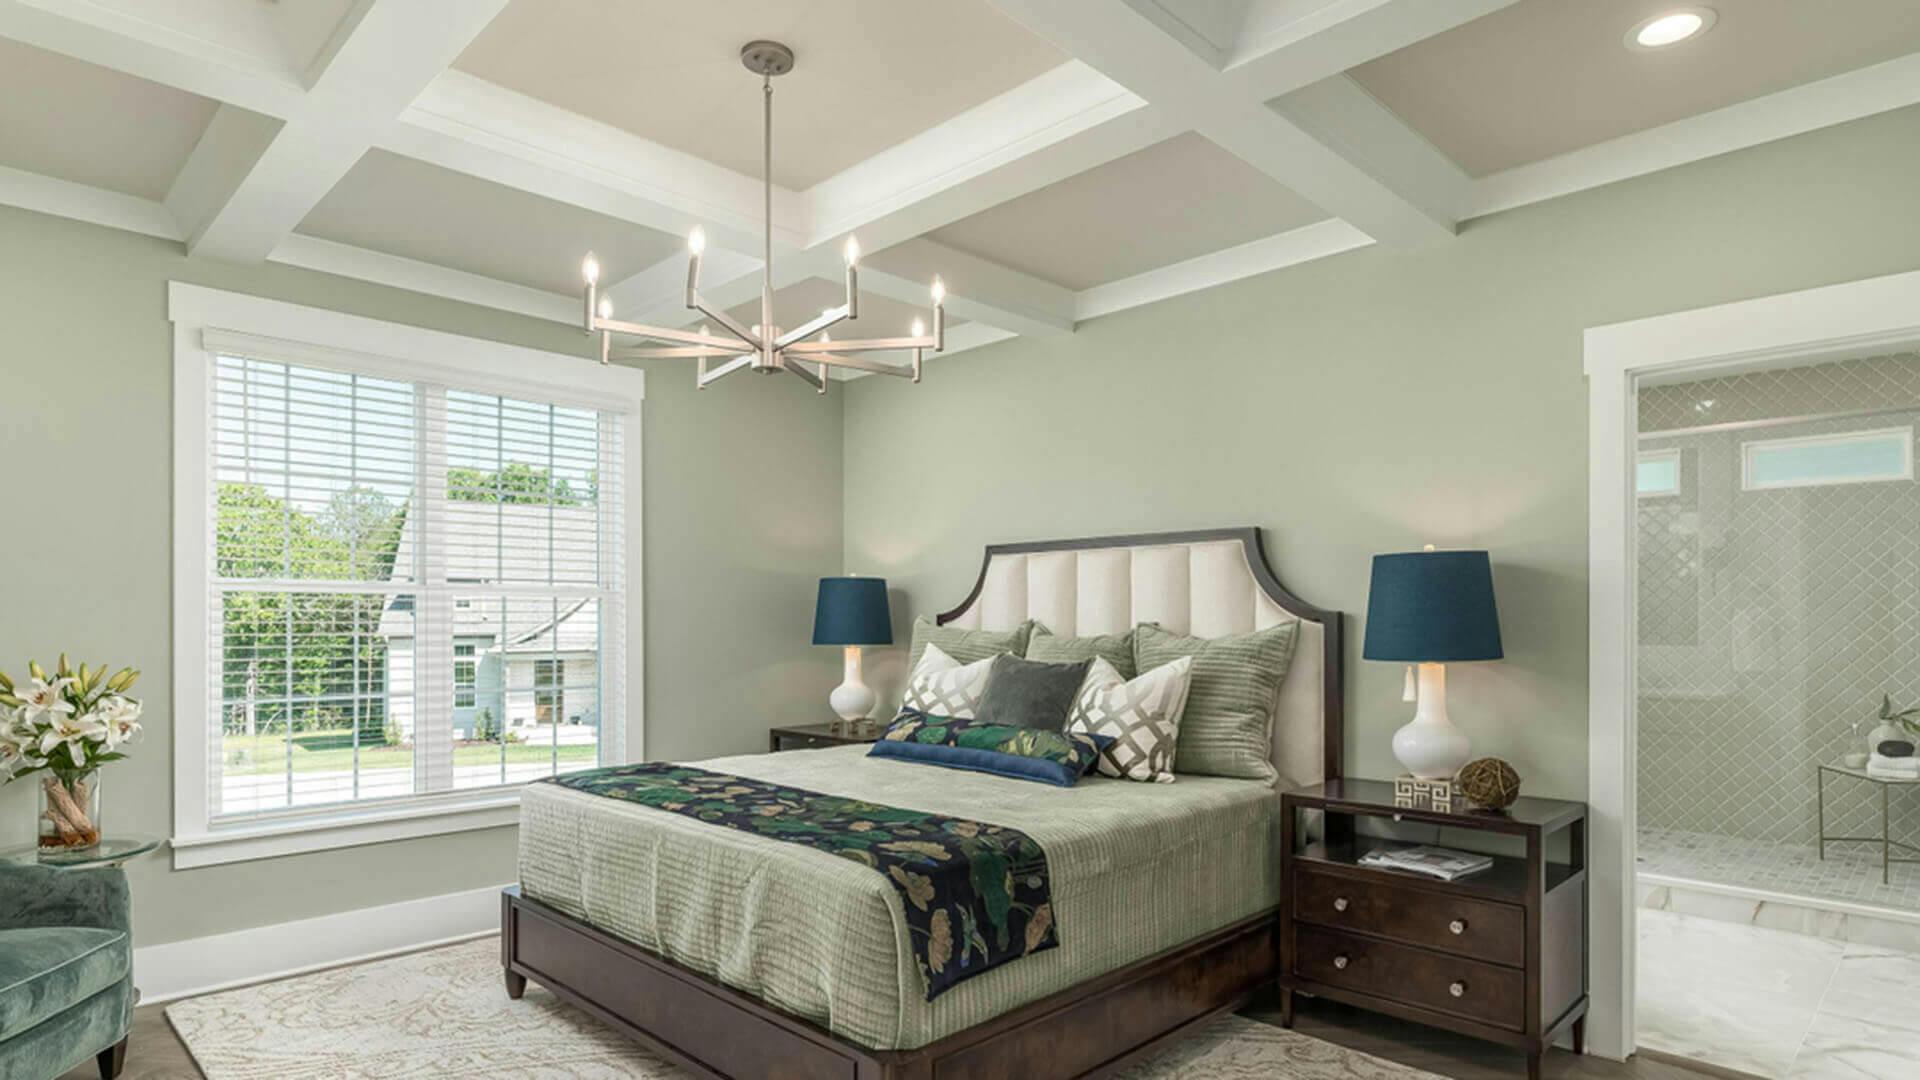 A bedroom with light sage green walls and bedding, featuring a white chandelier above the bed